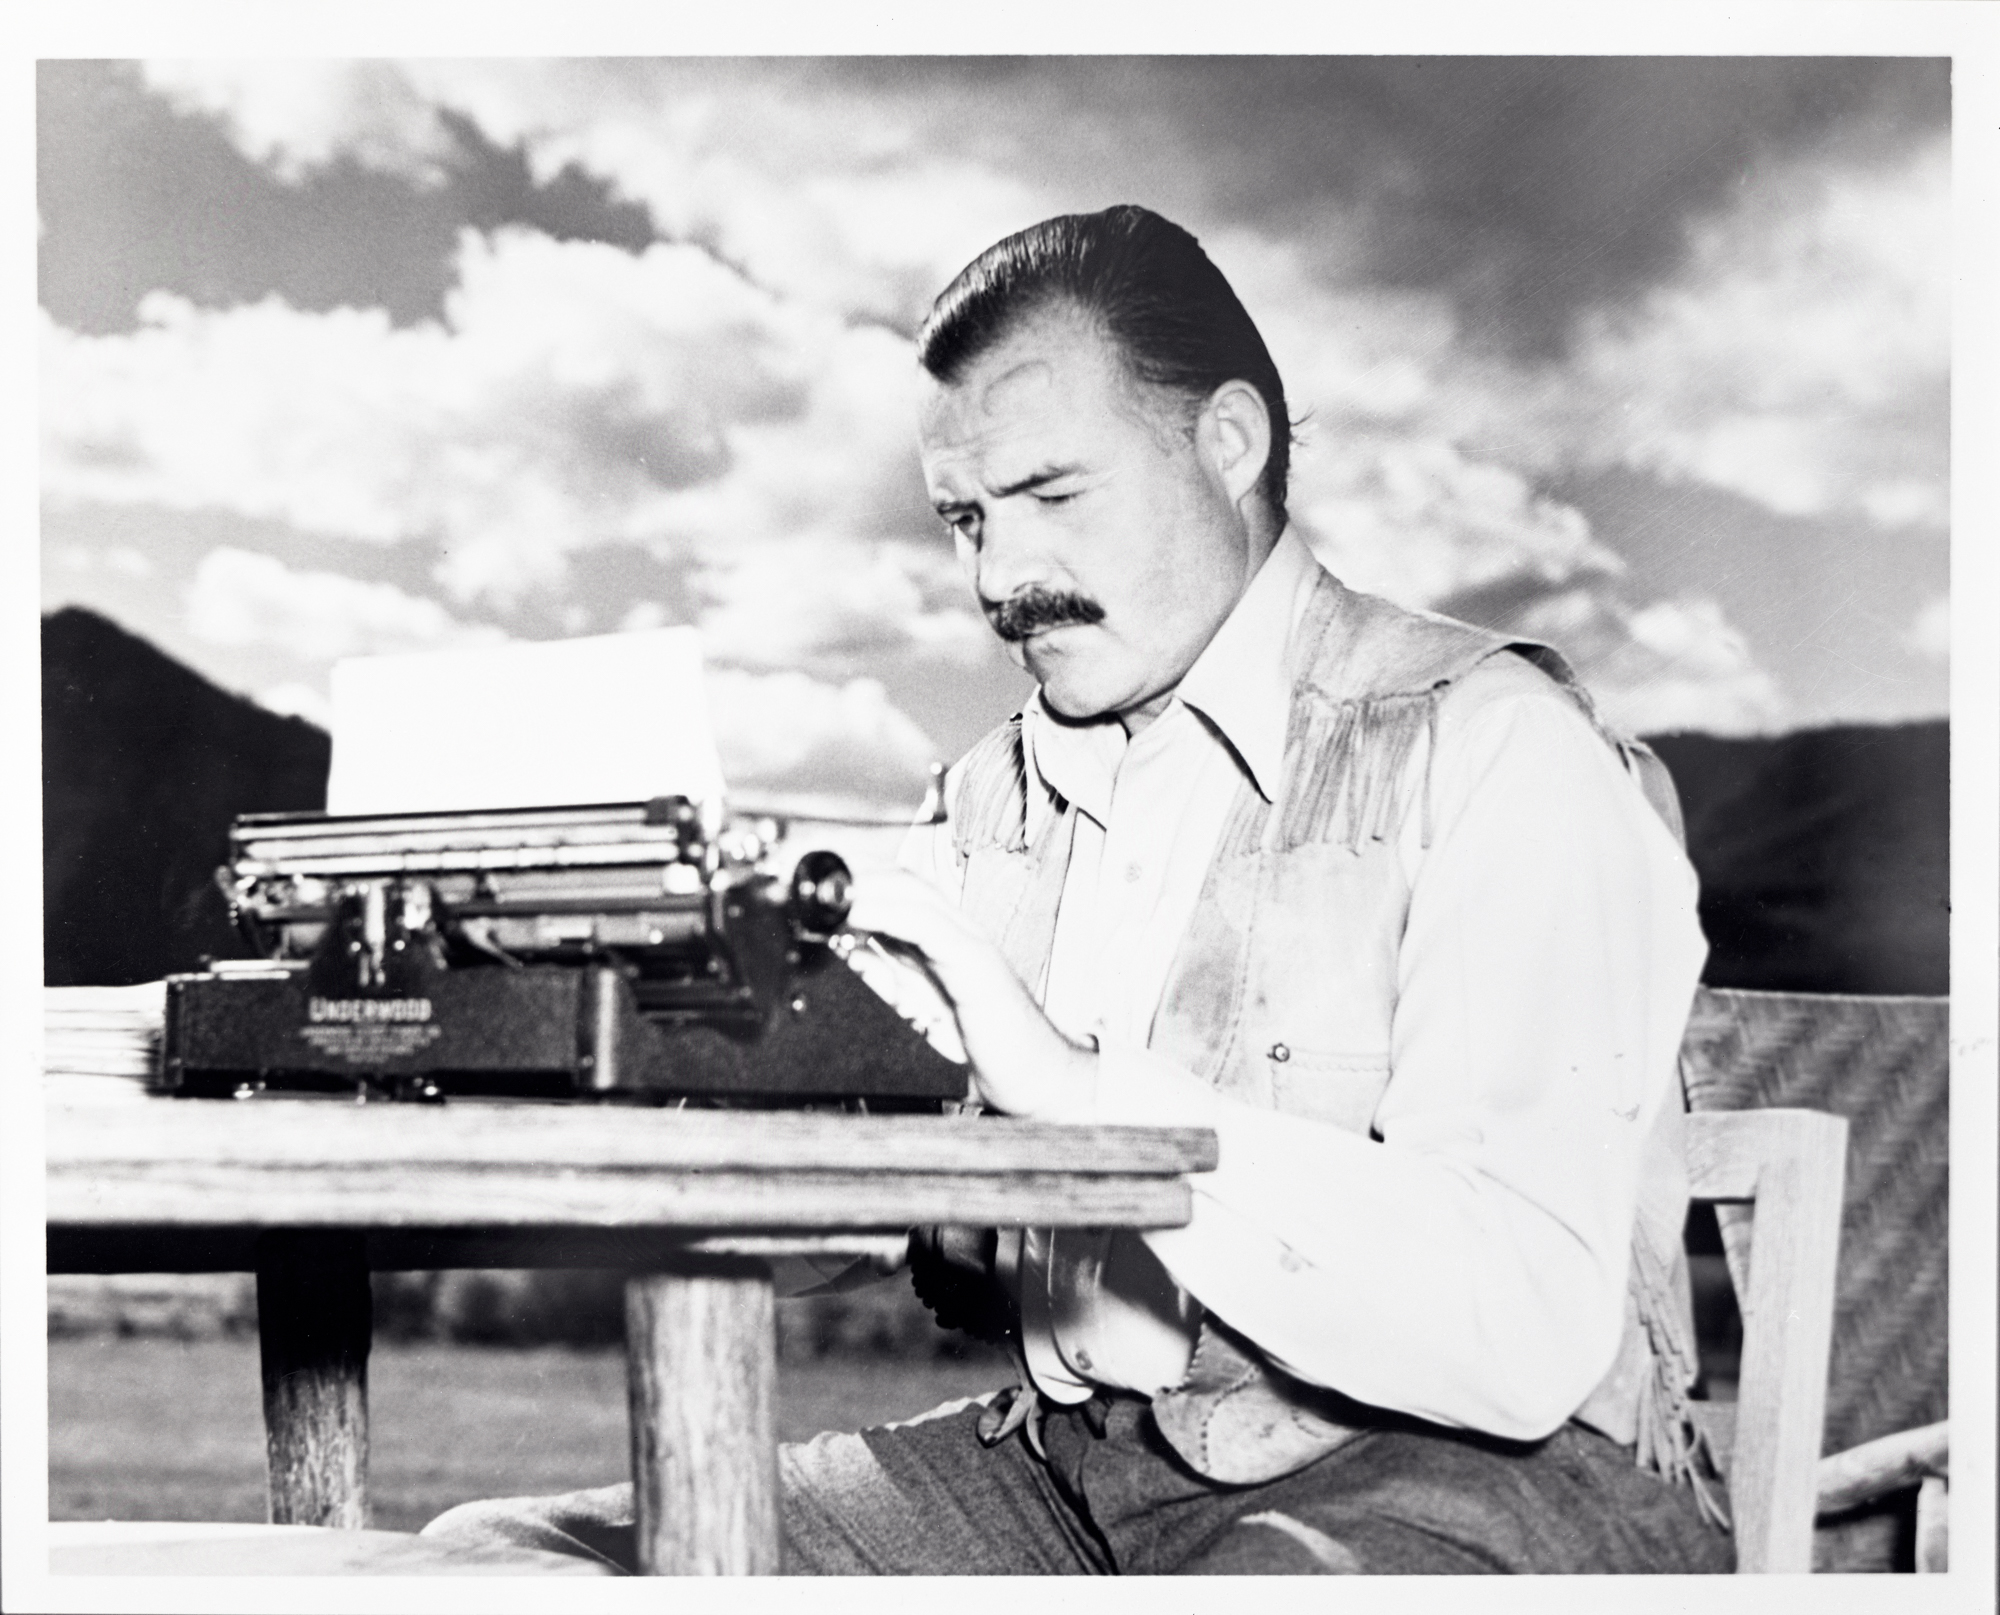 A posed black and white photograph of Ernest Hemingway typing outdoors. He wears jeans, a white shite, and a fringed vest. Behind him are mountains and a dramatically cloudy sky. He sits at a hewn wooden table.